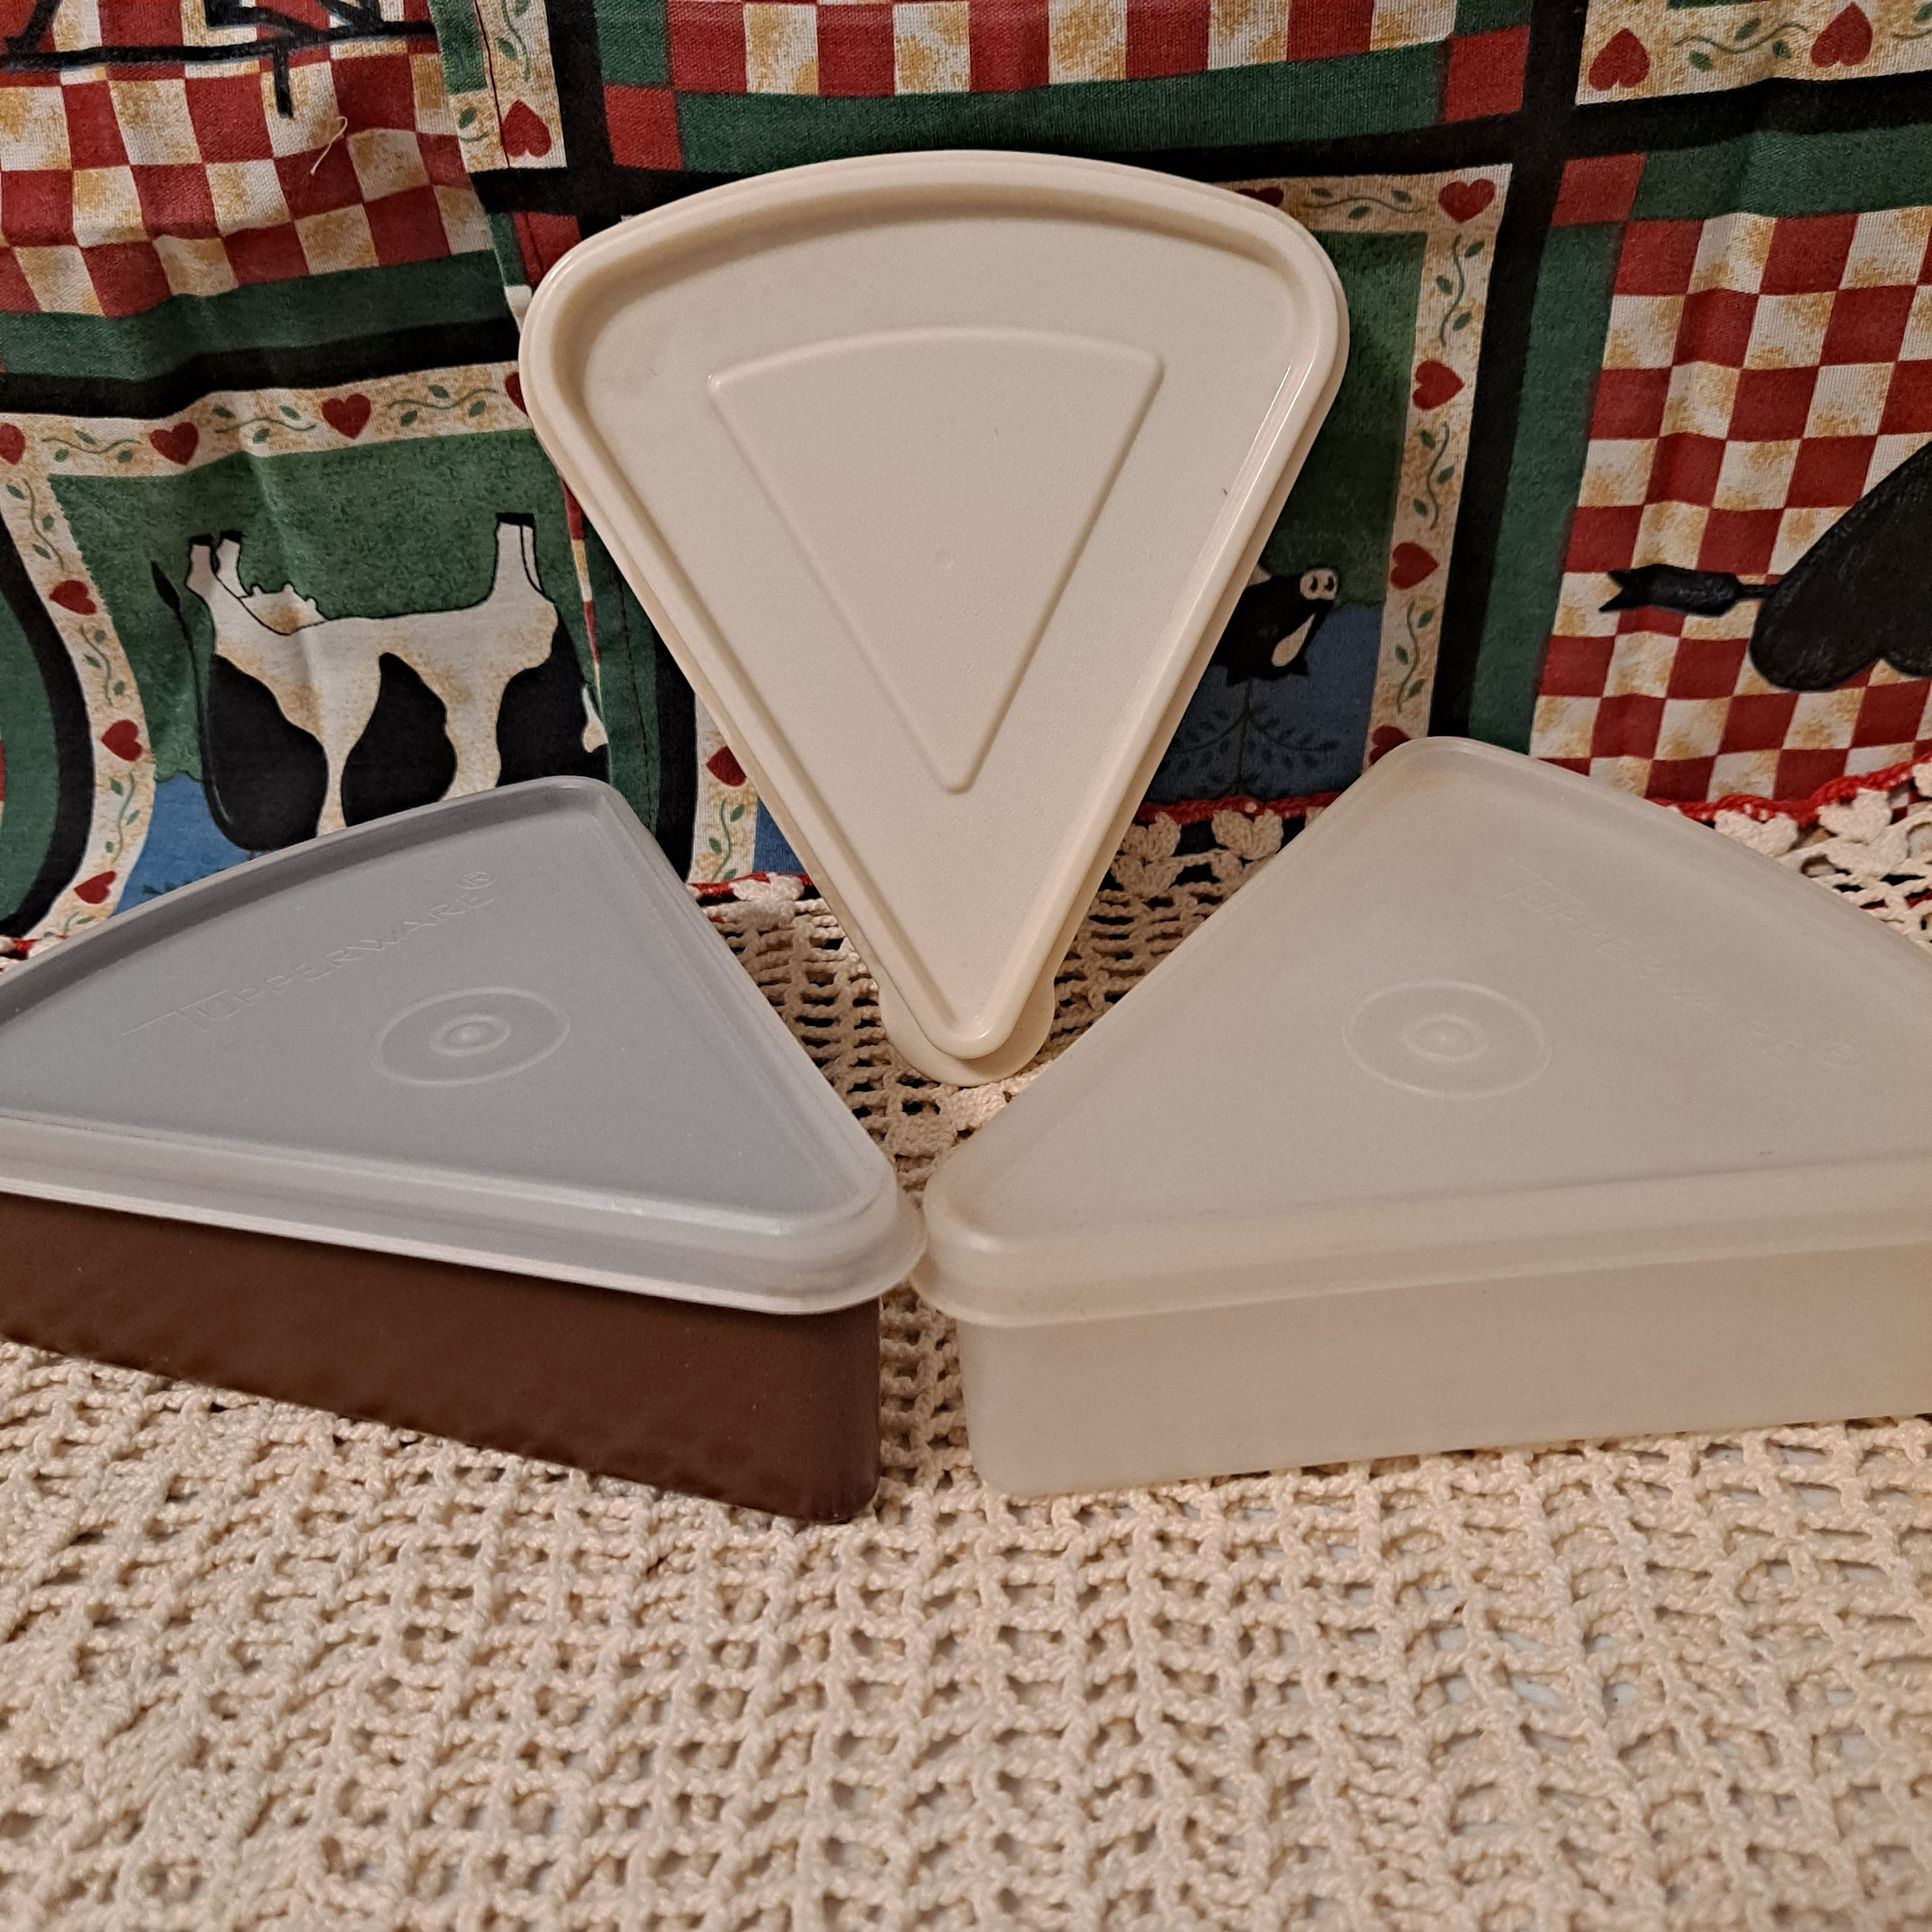 3 Authentic 1950s Tupperware Pie Slice Carrier Keepers - Ruby Lane